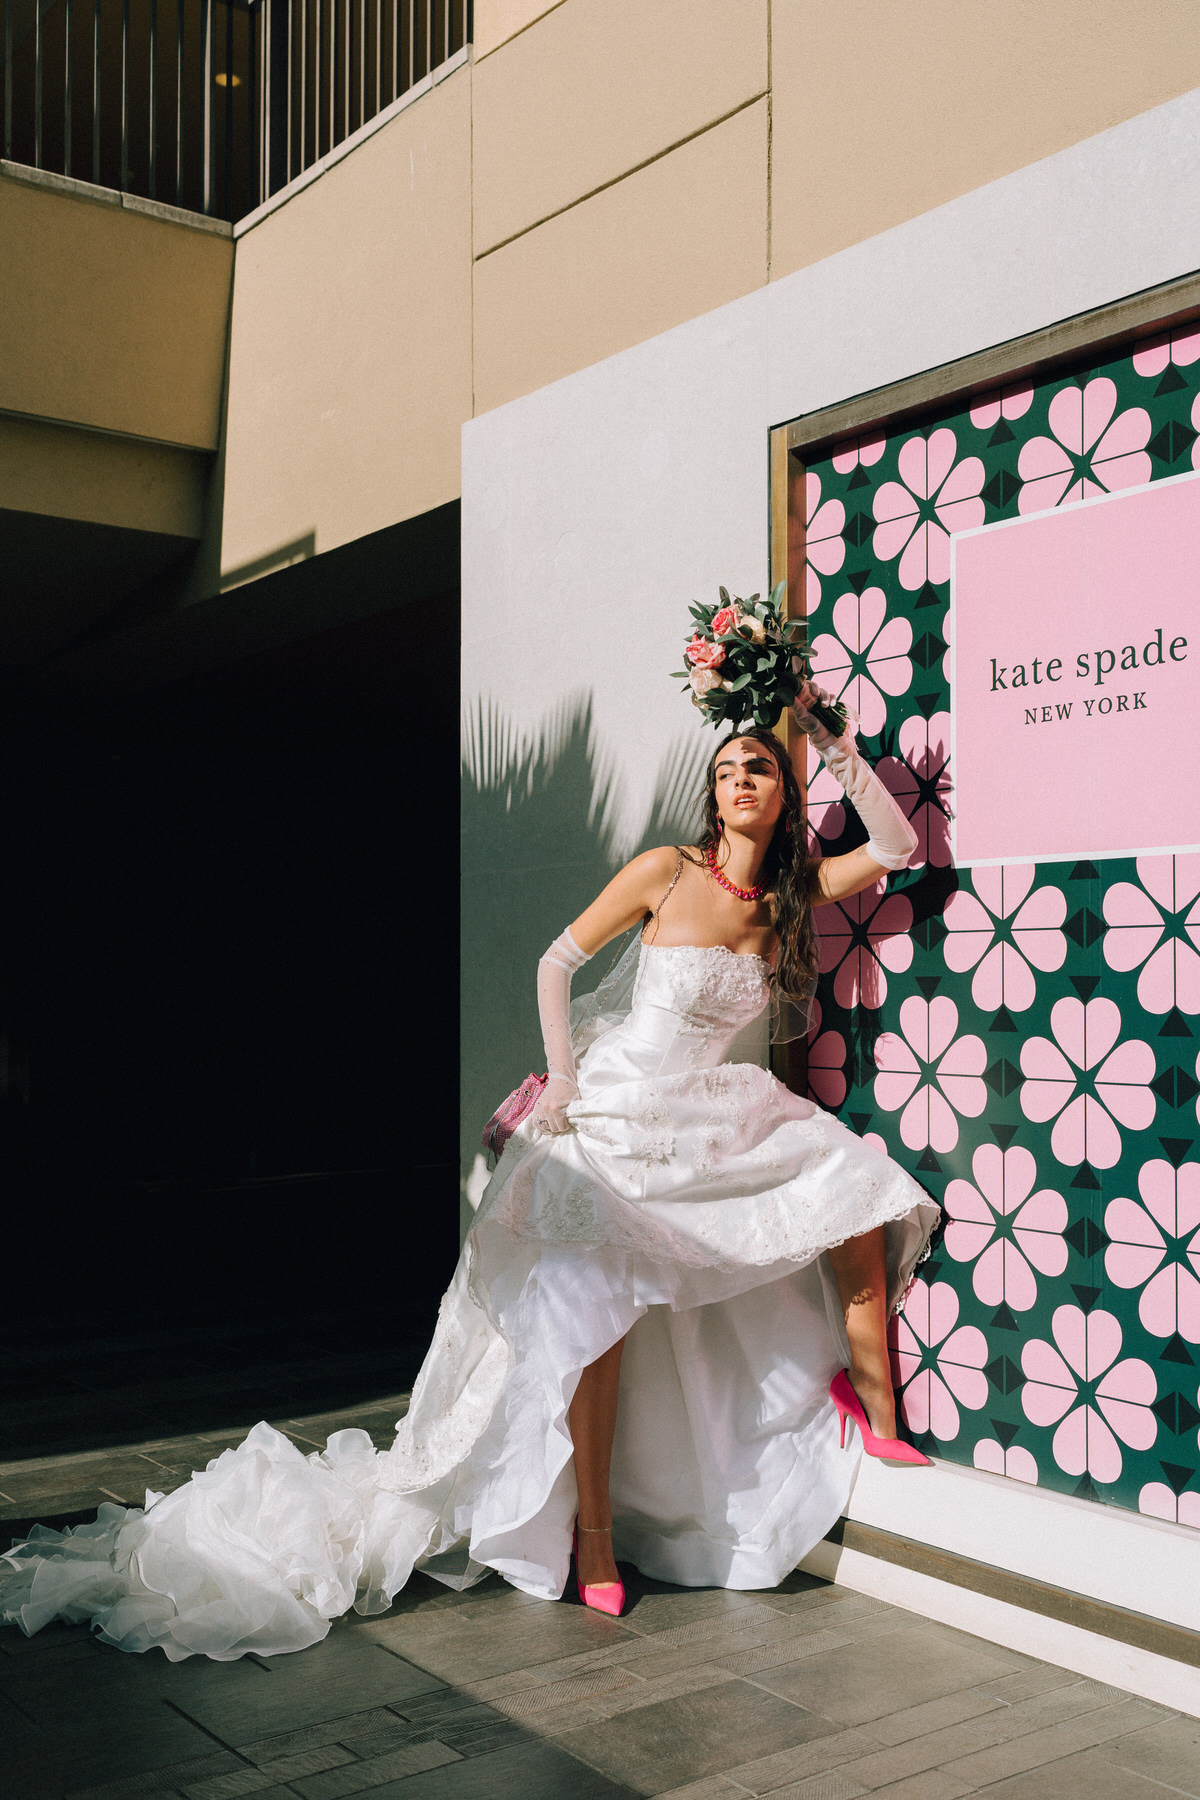 Bride poses in pink heels next to Kate Spade poster.